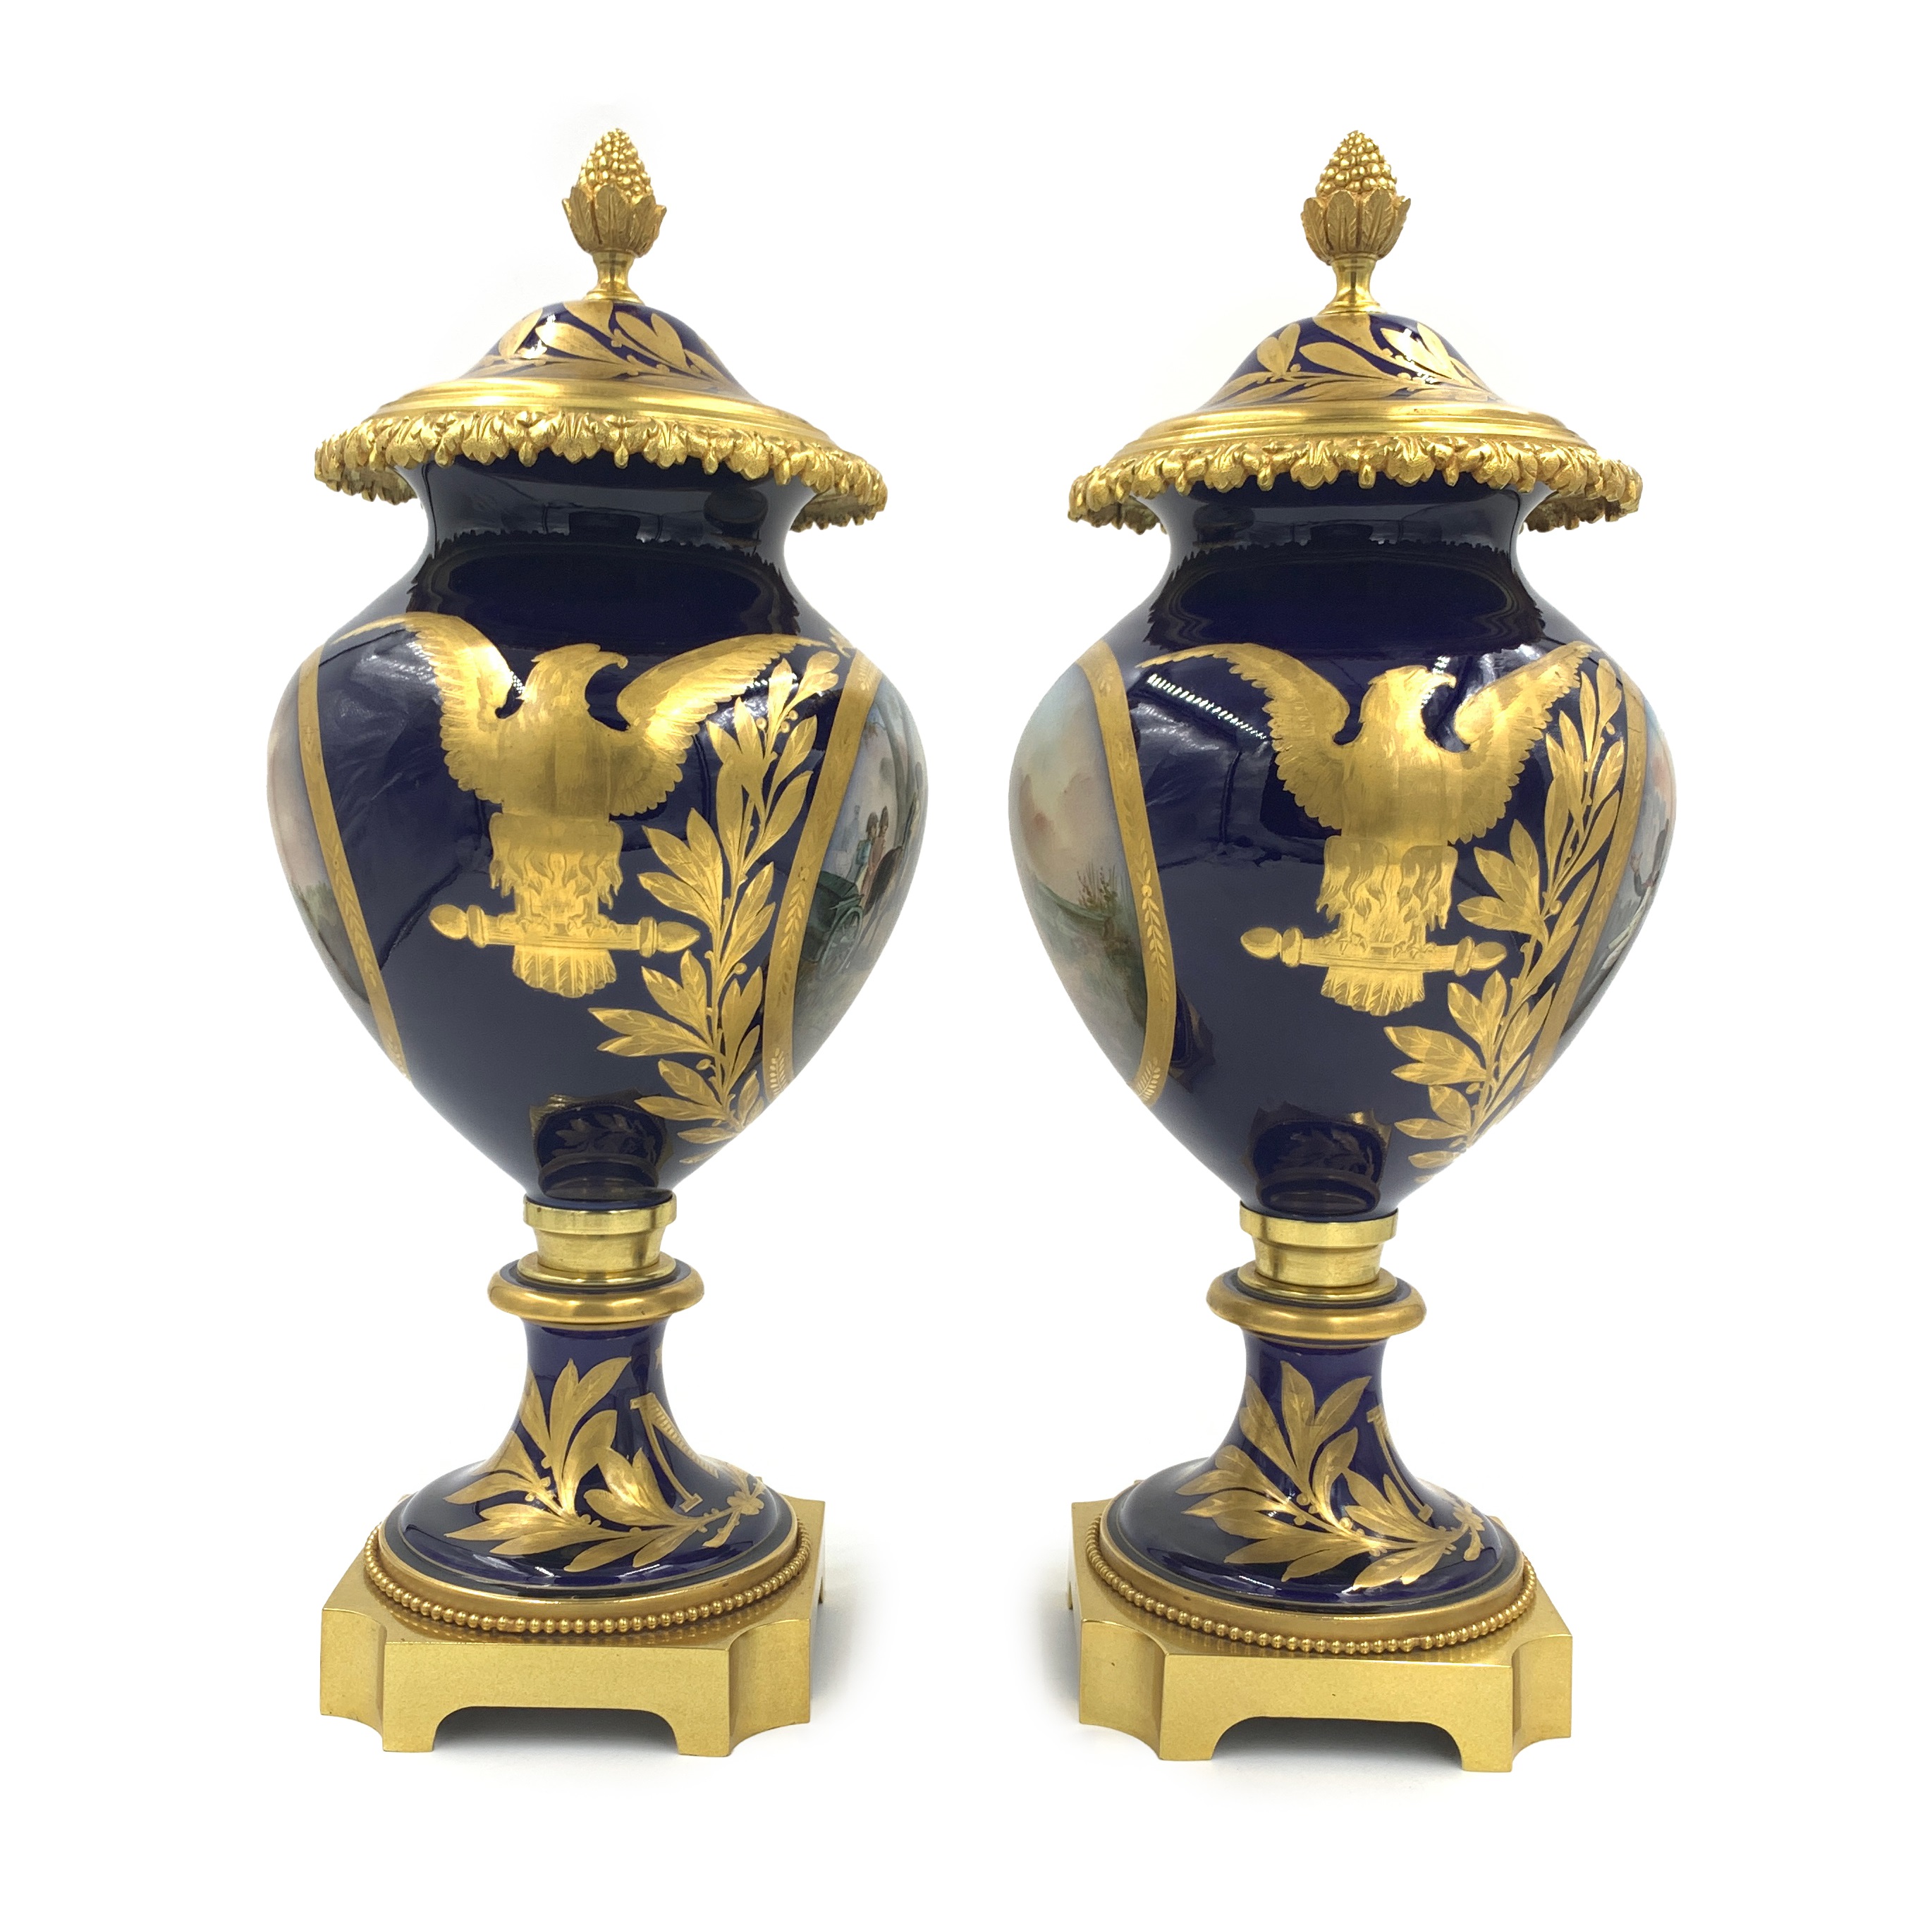 A FINE PAIR OF LATE 19TH / EARLY 20TH CENTURY SEVRES STYLE PORCELAIN NAPOLEON VASES - Image 3 of 14